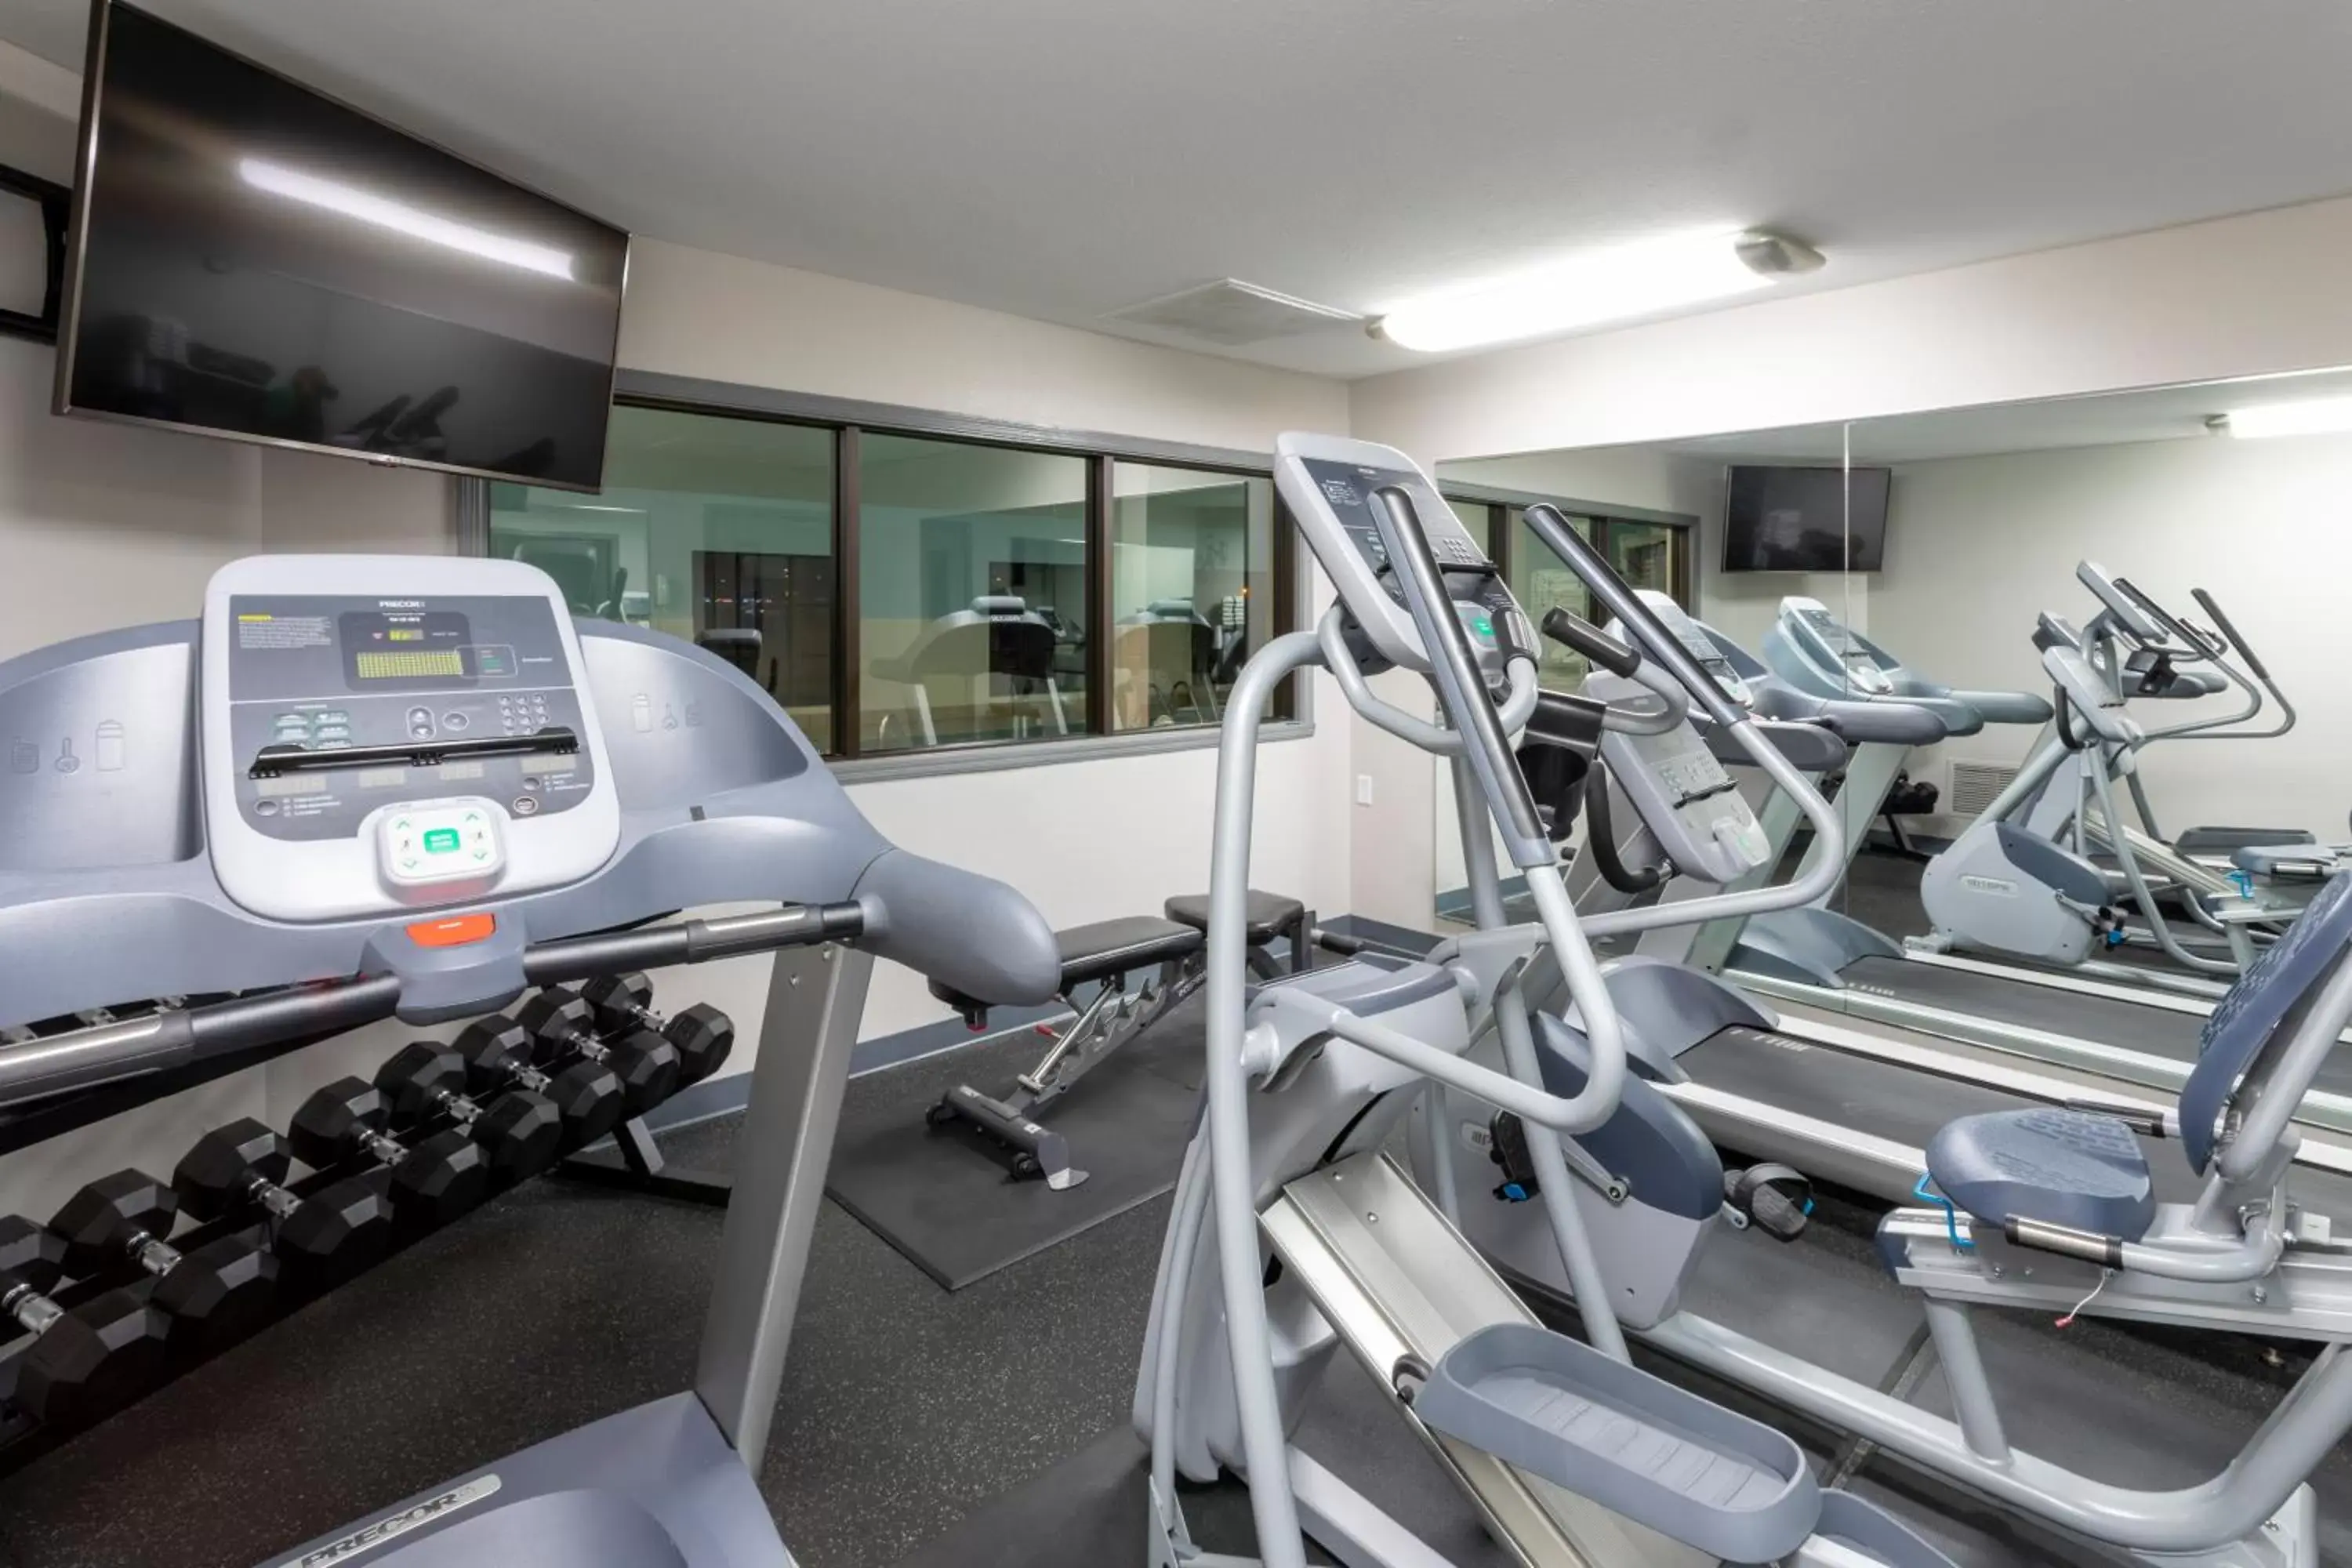 Fitness centre/facilities, Fitness Center/Facilities in Country Inn & Suites by Radisson, Fargo, ND